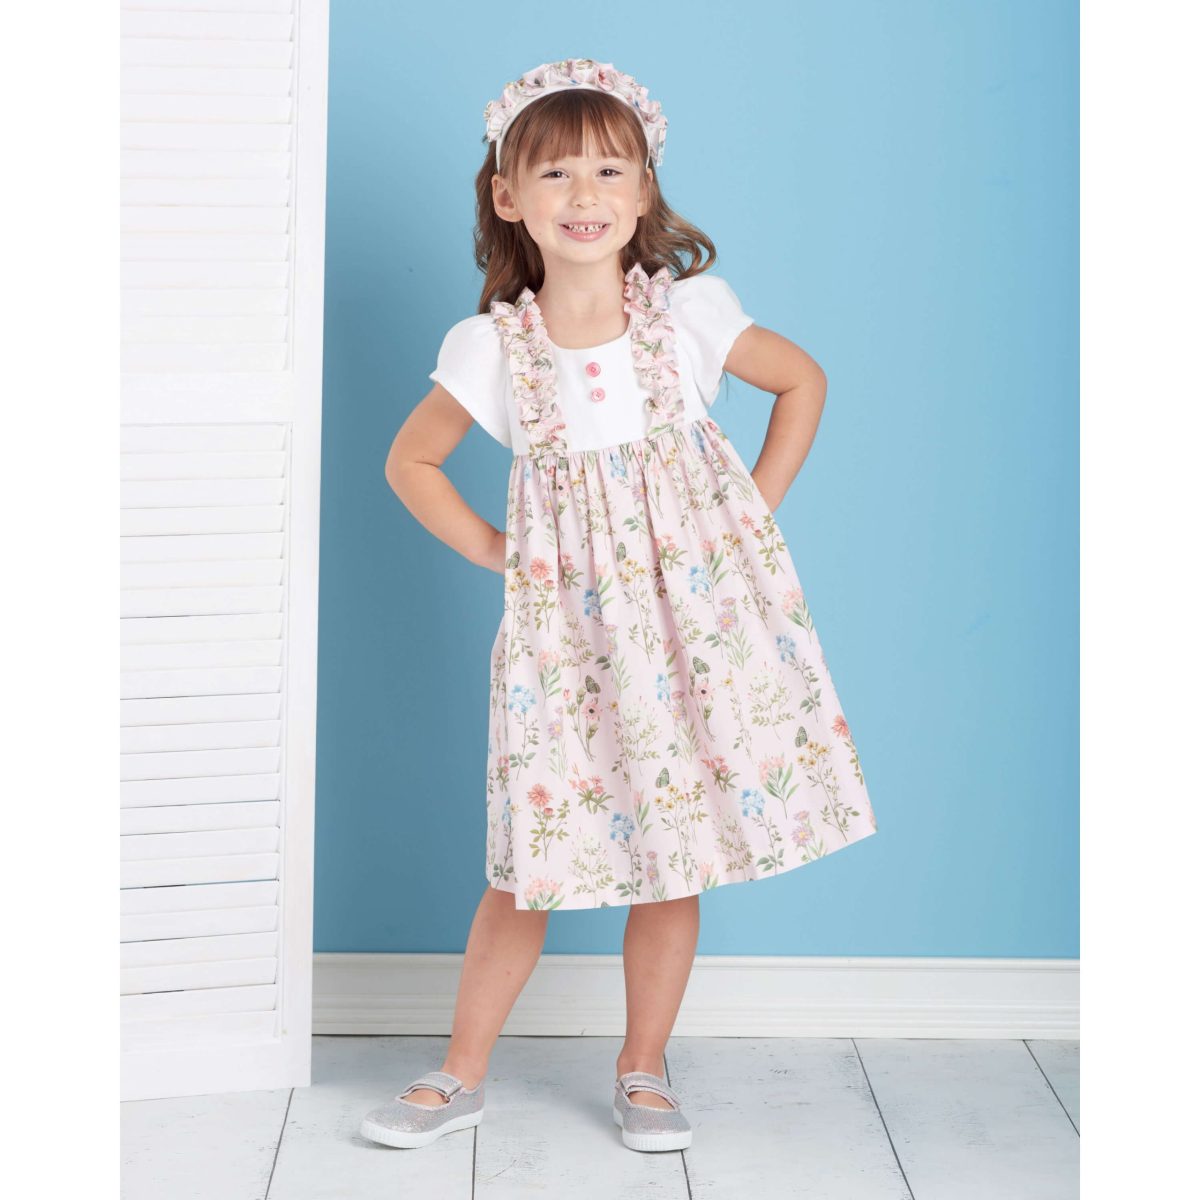 Simplicity Sewing Pattern S9559 Children's Dress, Top, Trousers, Purses and Headband